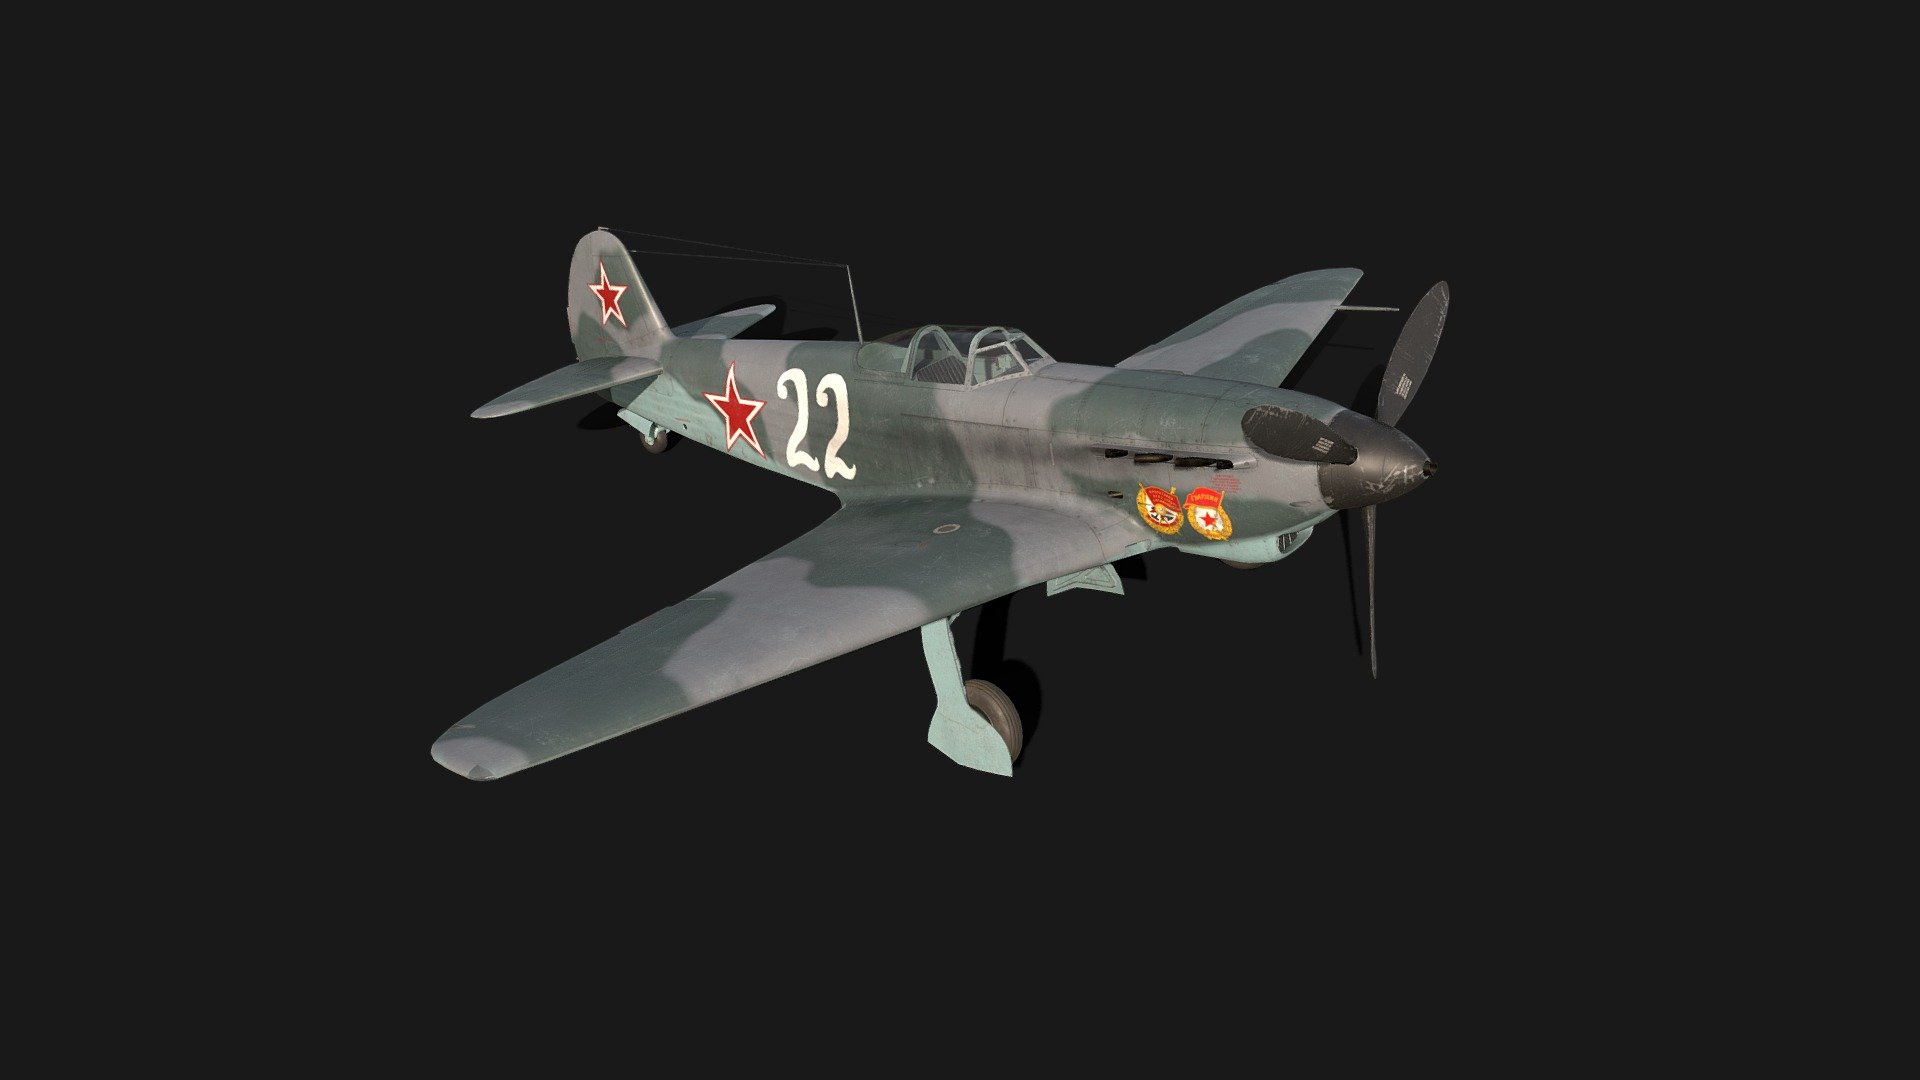 The Yakovlev Yak-9 is a single-engine, single-seat multipurpose fighter aircraft used by the Soviet Union and its allies during World War II and the early Cold War.
The Yak-9 was manoeuvrable at high speeds when flying at low and medium altitudes and was also easy to control, qualities that allowed it to be one of most produced Soviet fighters of World War II 3d model